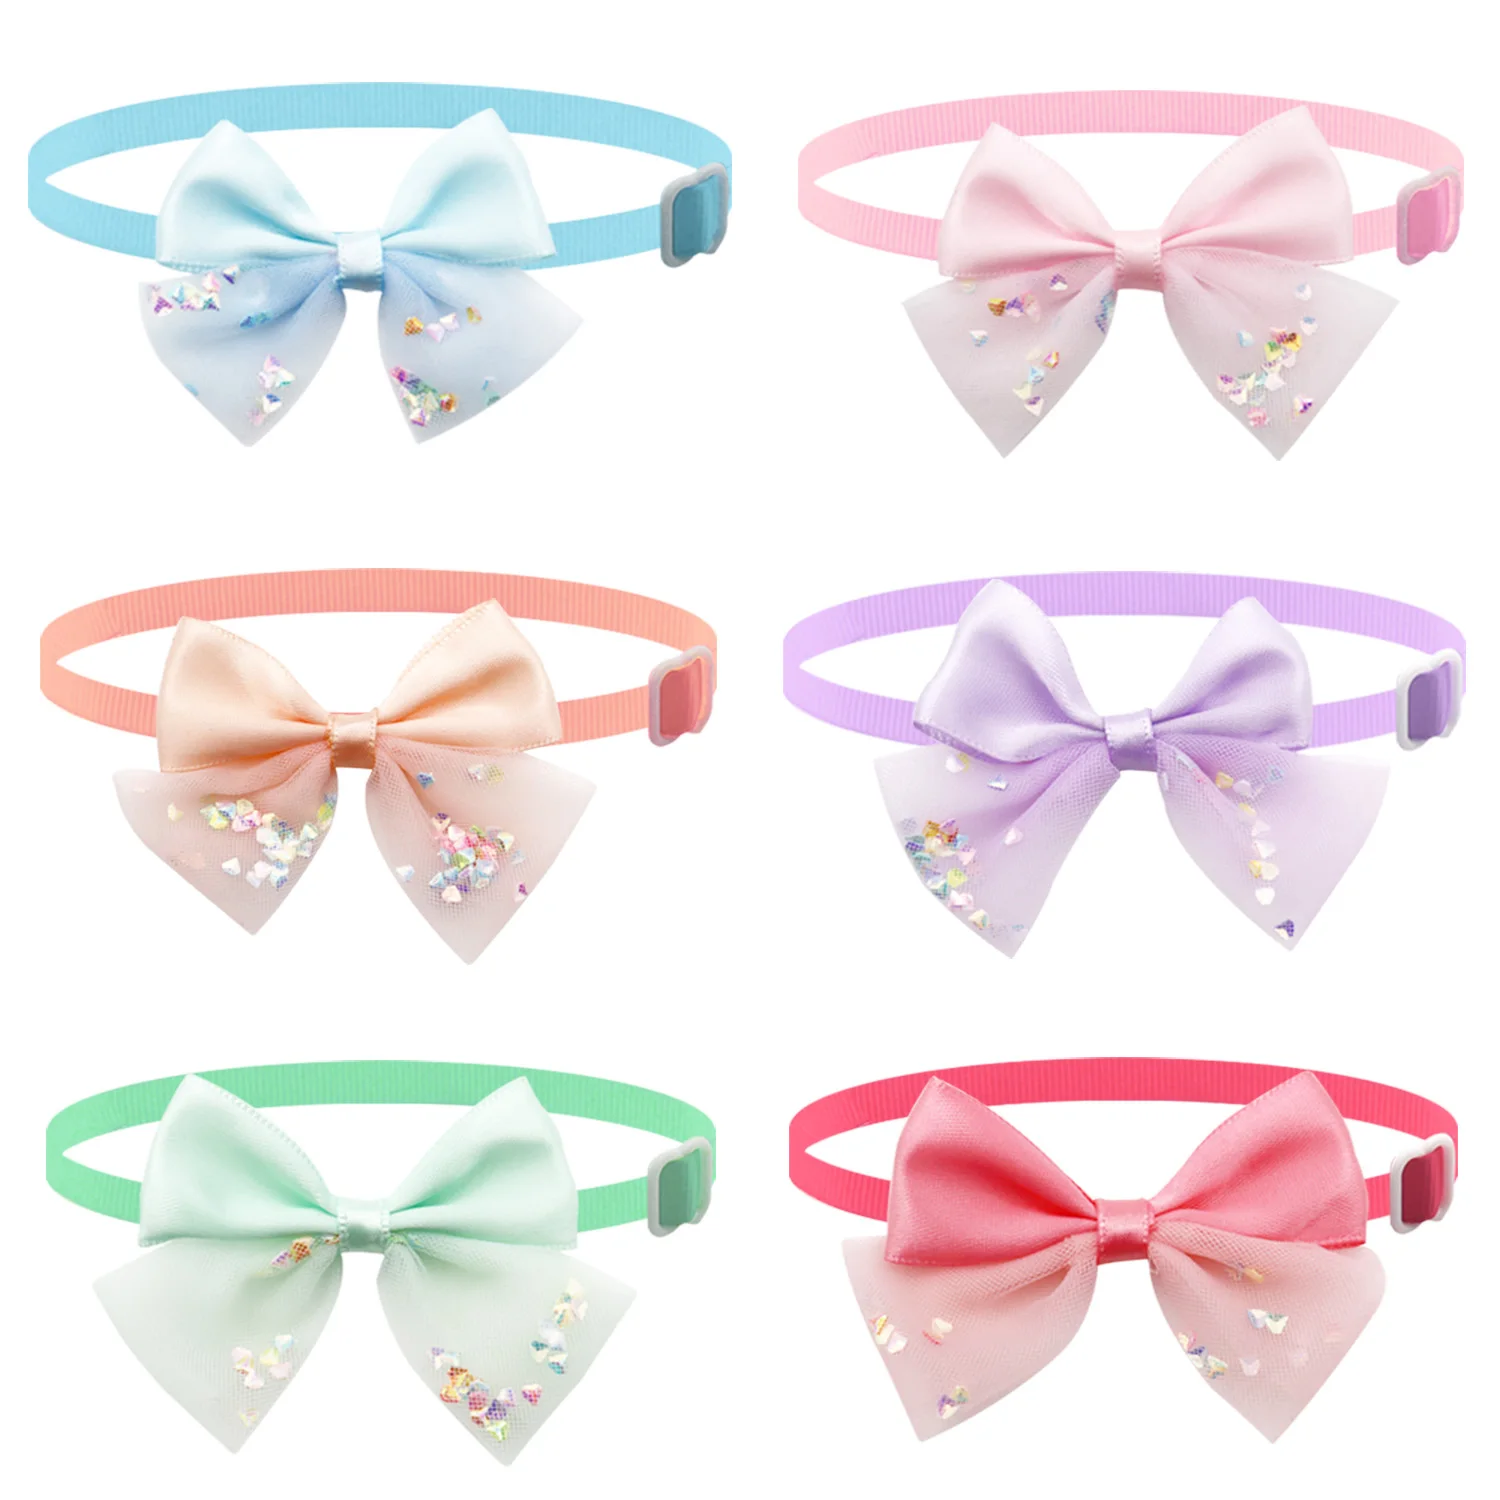 

Cat For Accessories Pet Bling Collar Adjustable Dog Ties Product 50/100pcs Bows Puppies Bowtie Bows Grooming Girls Soft Yarn Dog